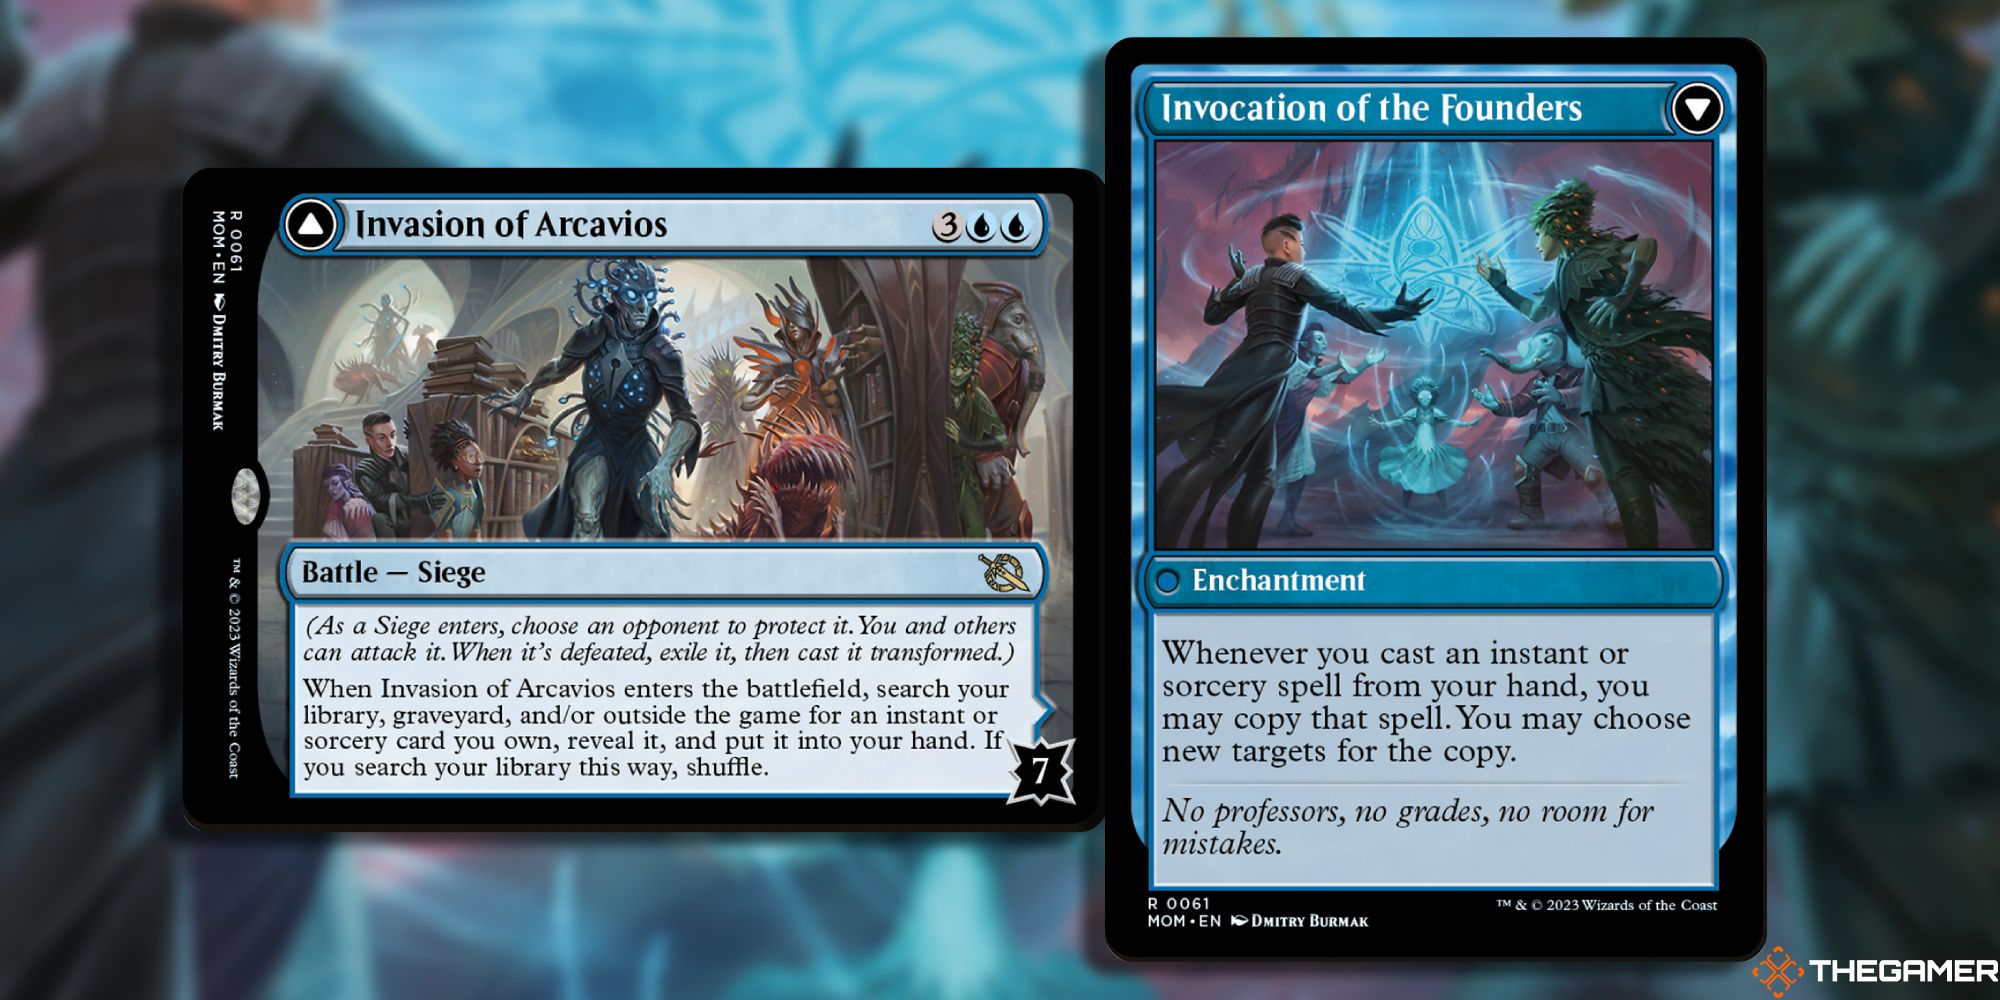 Invasion of Arcavios card image from Magic: The Gathering, illustration by Dmitry Burmak